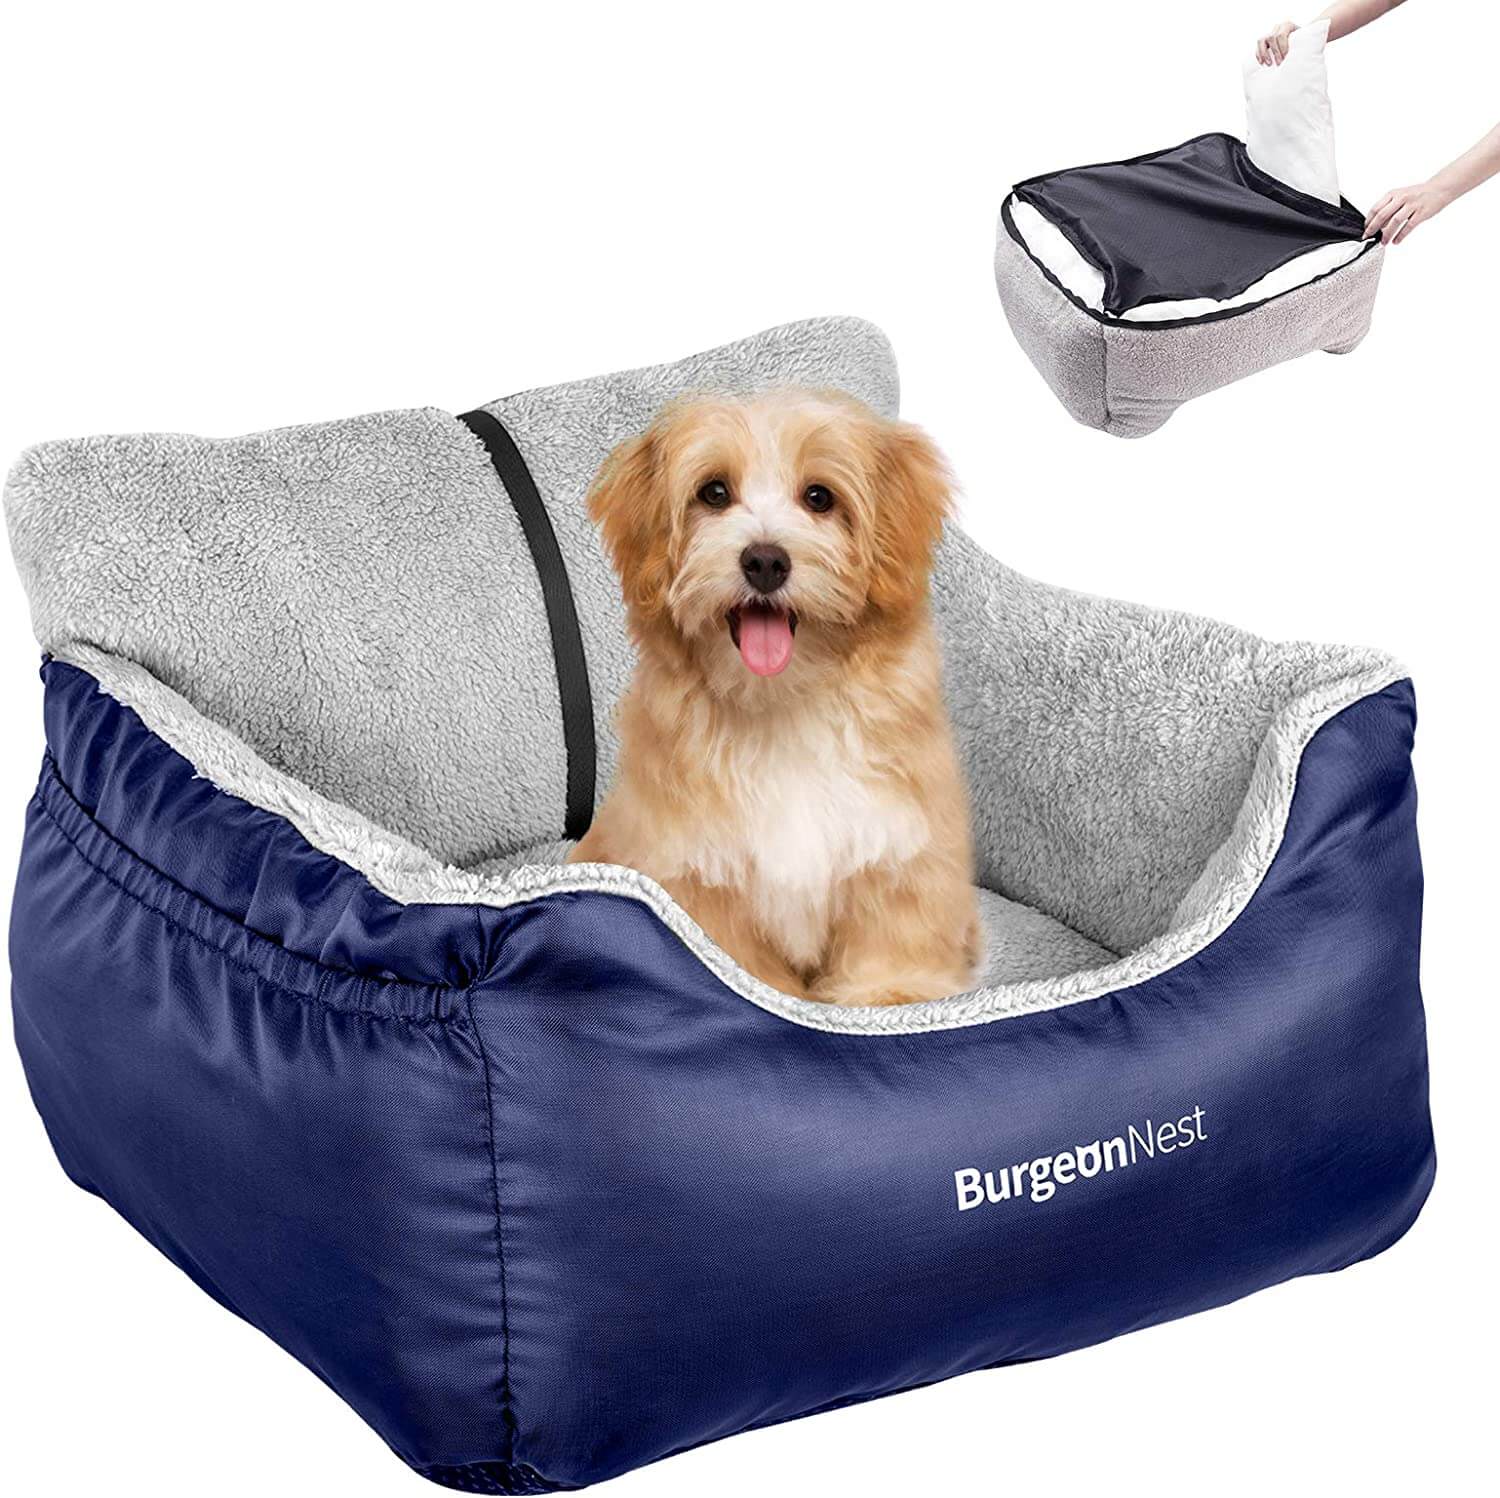 BurgeonNest Fully Detachable and Washable Dog Car Seat for Small Dogs